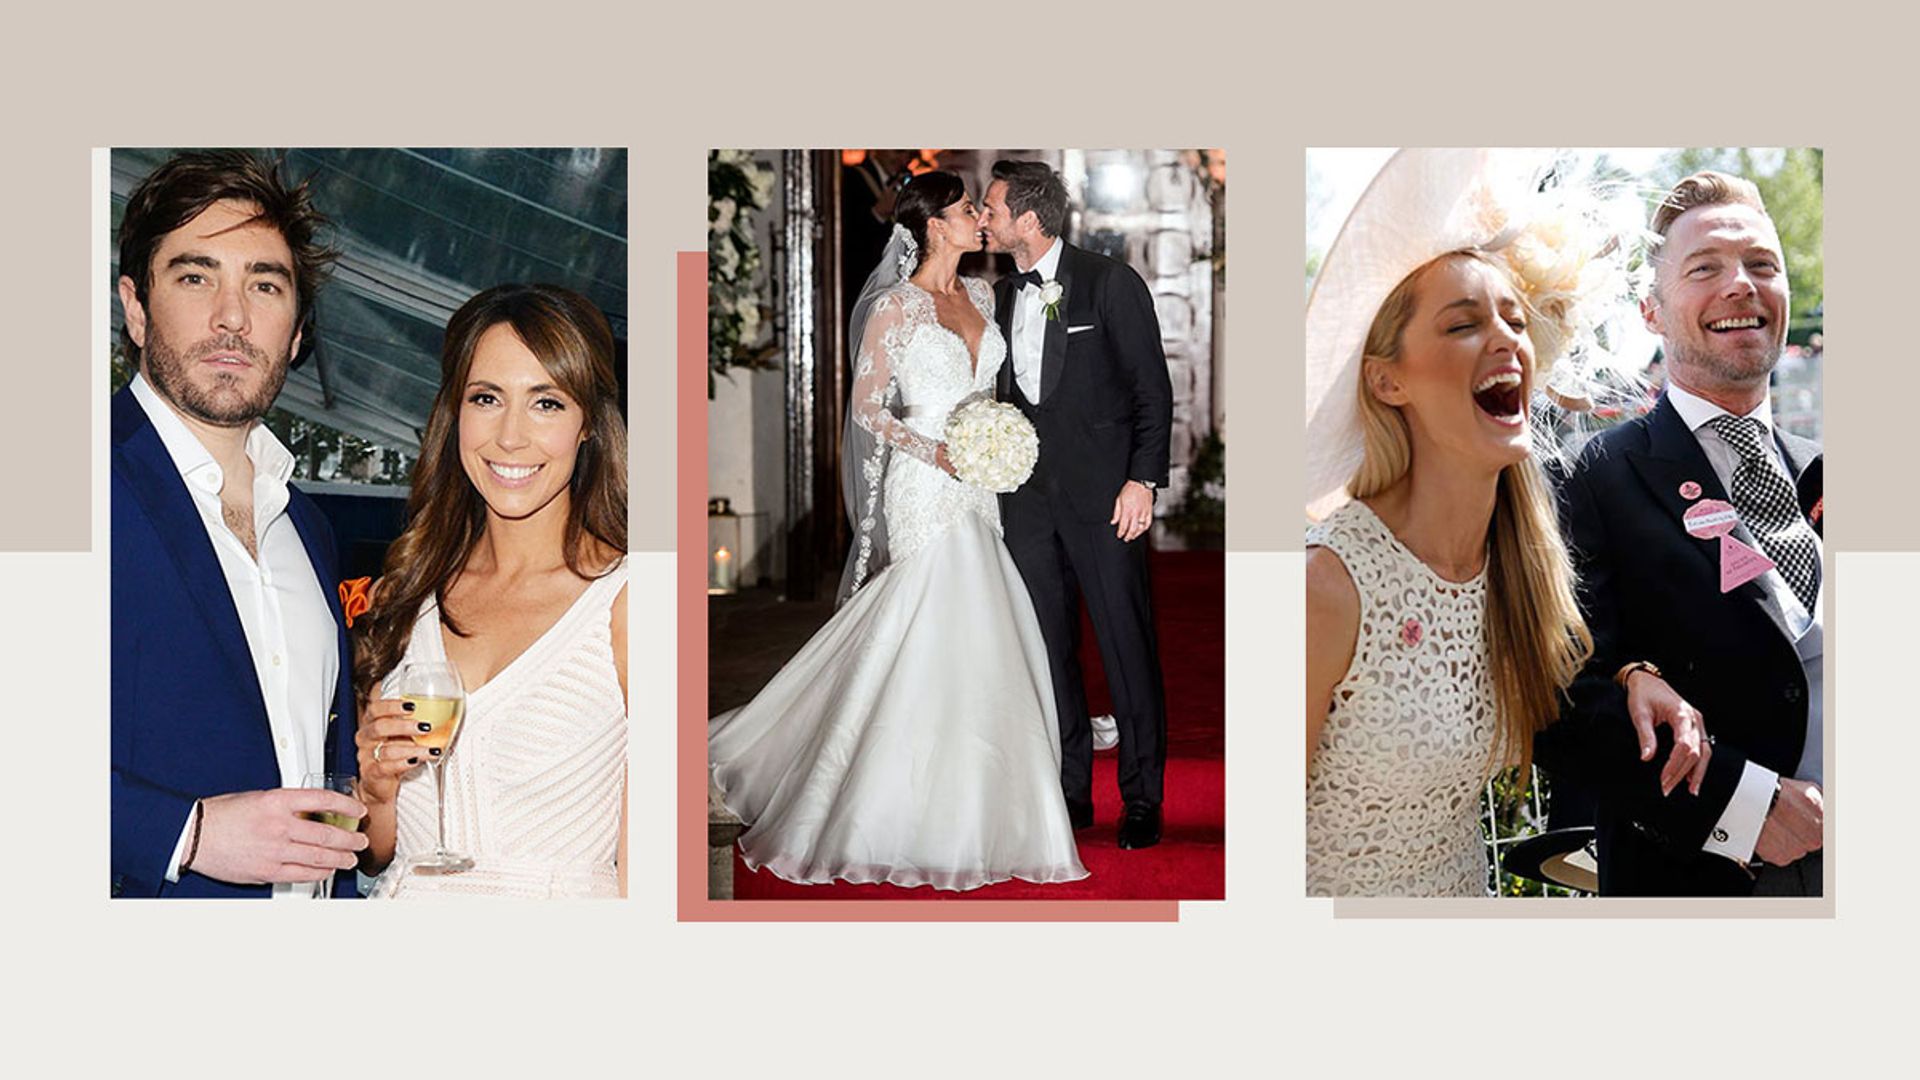 6 unmissable wedding photos of The One Show hosts: From Alex Jones to Ronan Keating